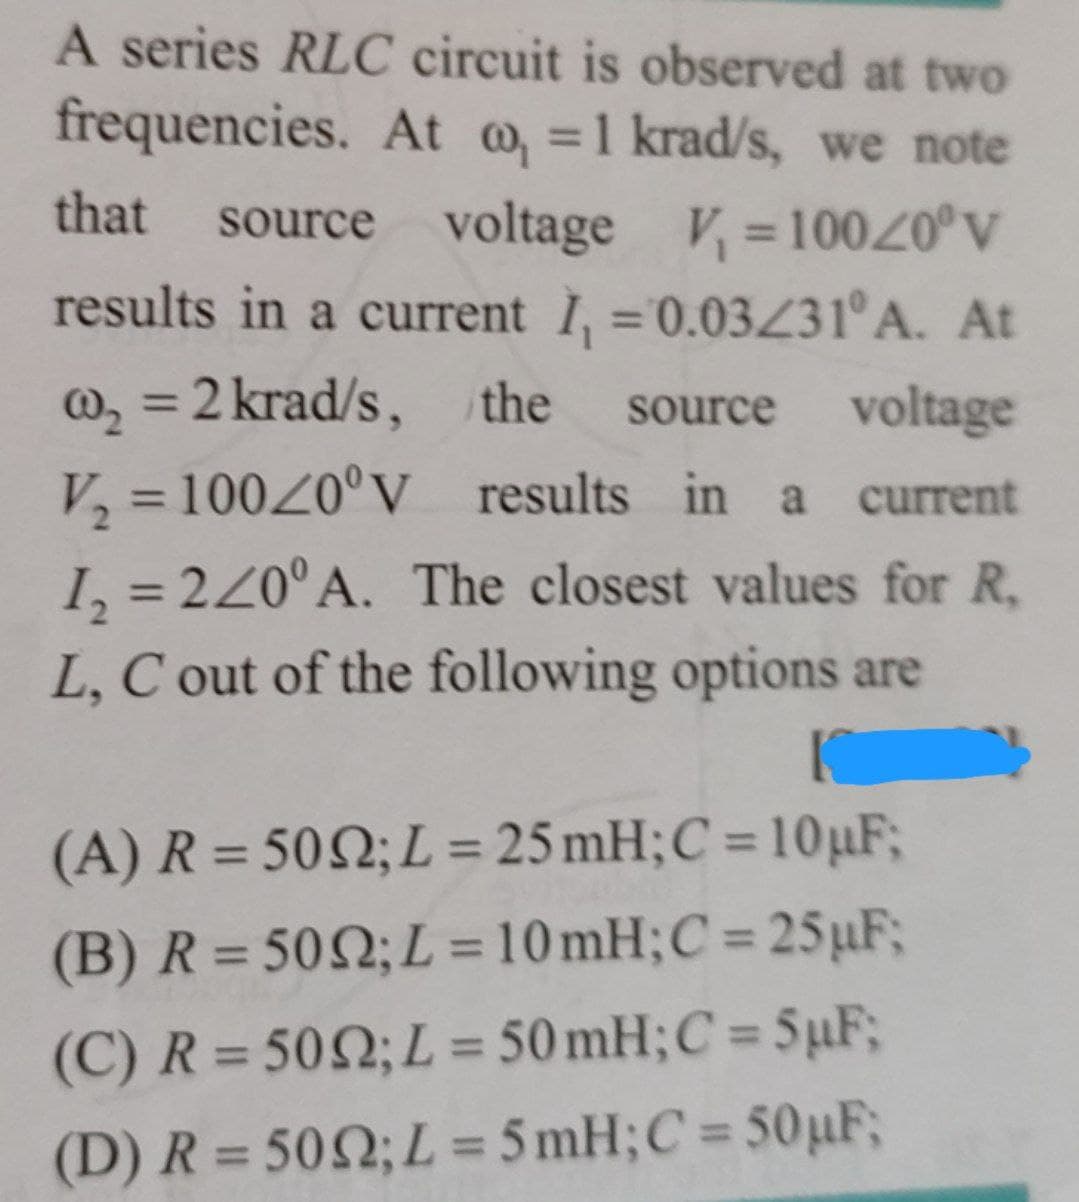 A series RLC circuit is observed at two
frequencies. At , = 1 krad/s, we note
that source voltage V₁ =10020°V
results in a current I₁ = 0.03231°º A. At
@₂ = 2 krad/s, the source voltage
V₂ = 100/0° V results in a current
1₂ = 220° A. The closest values for R,
L, C out of the following options are
(A) R = 5002; L = 25 mH; C = 10uF;
(B) R = 5002; L=10mH; C = 25uF;
(C) R = 5002; L = 50mH; C = SuF;
(D) R = 5002; L = 5mH; C = 50µF;